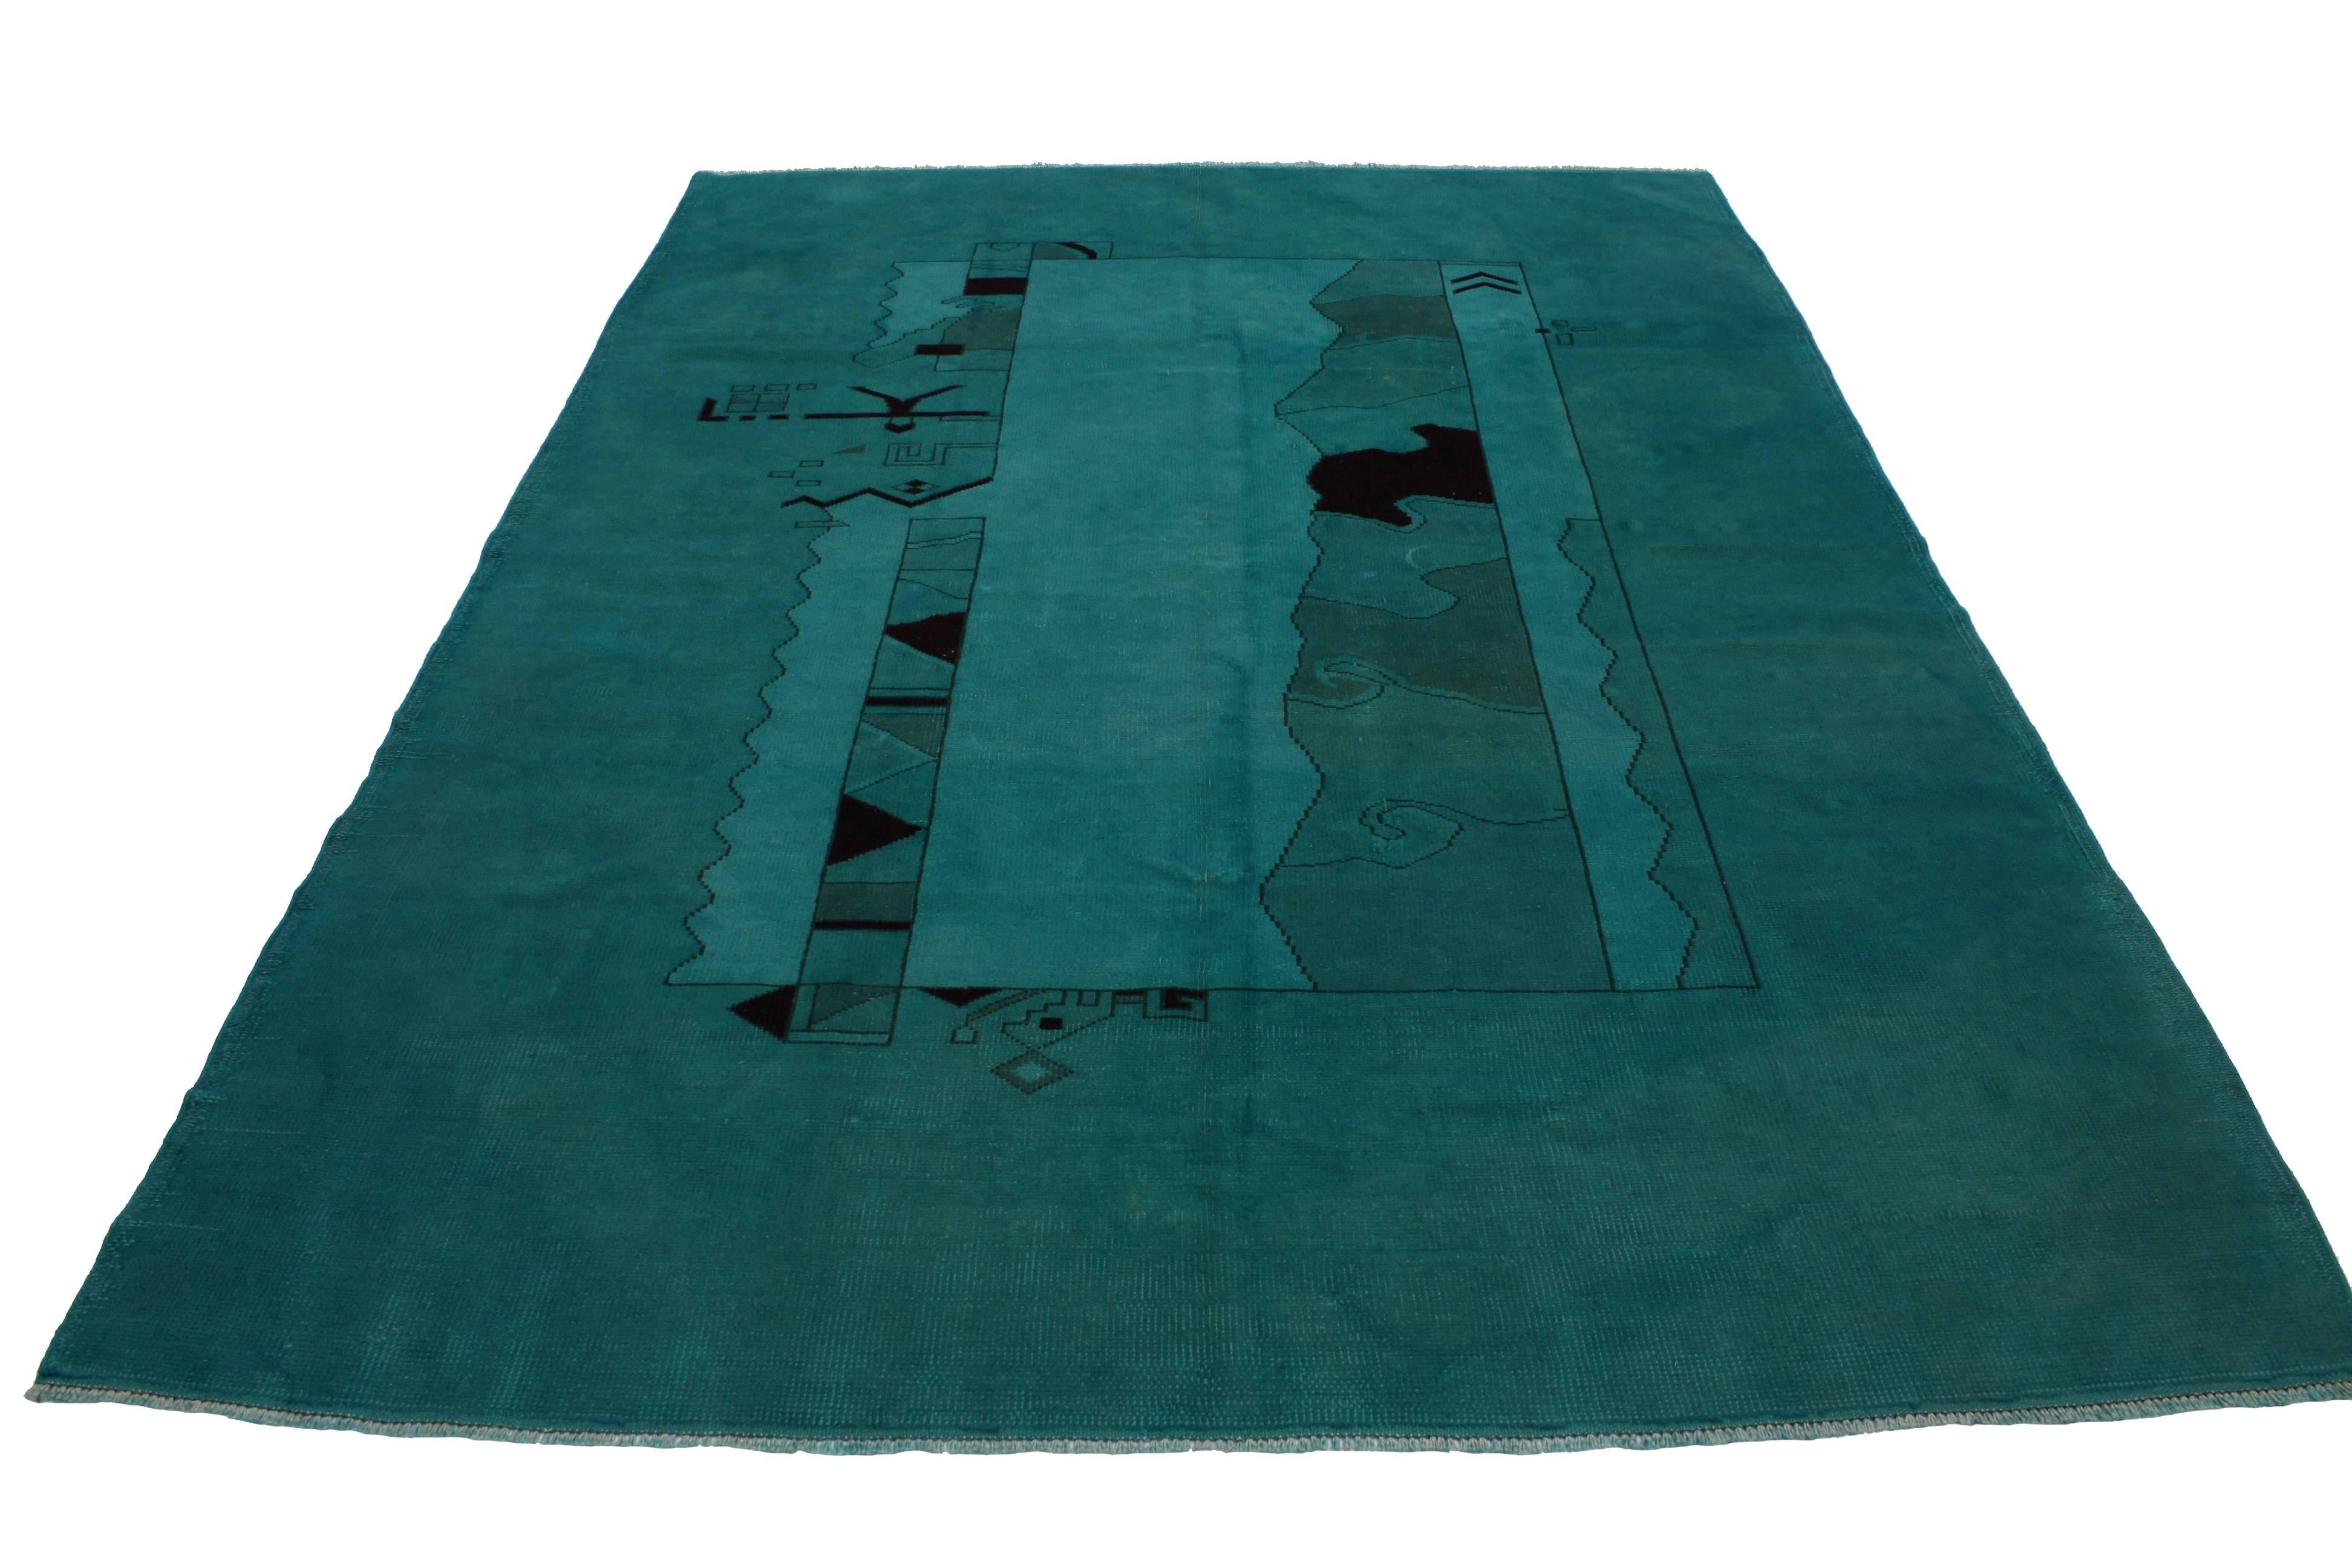 Add richness and depth to a sleek interior with this vintage Turkish Oushak rug overdyed in teal with contemporary modern style. With its artistic statement and functional versatility, this overdyed Oushak rug will create a stunning focal point.